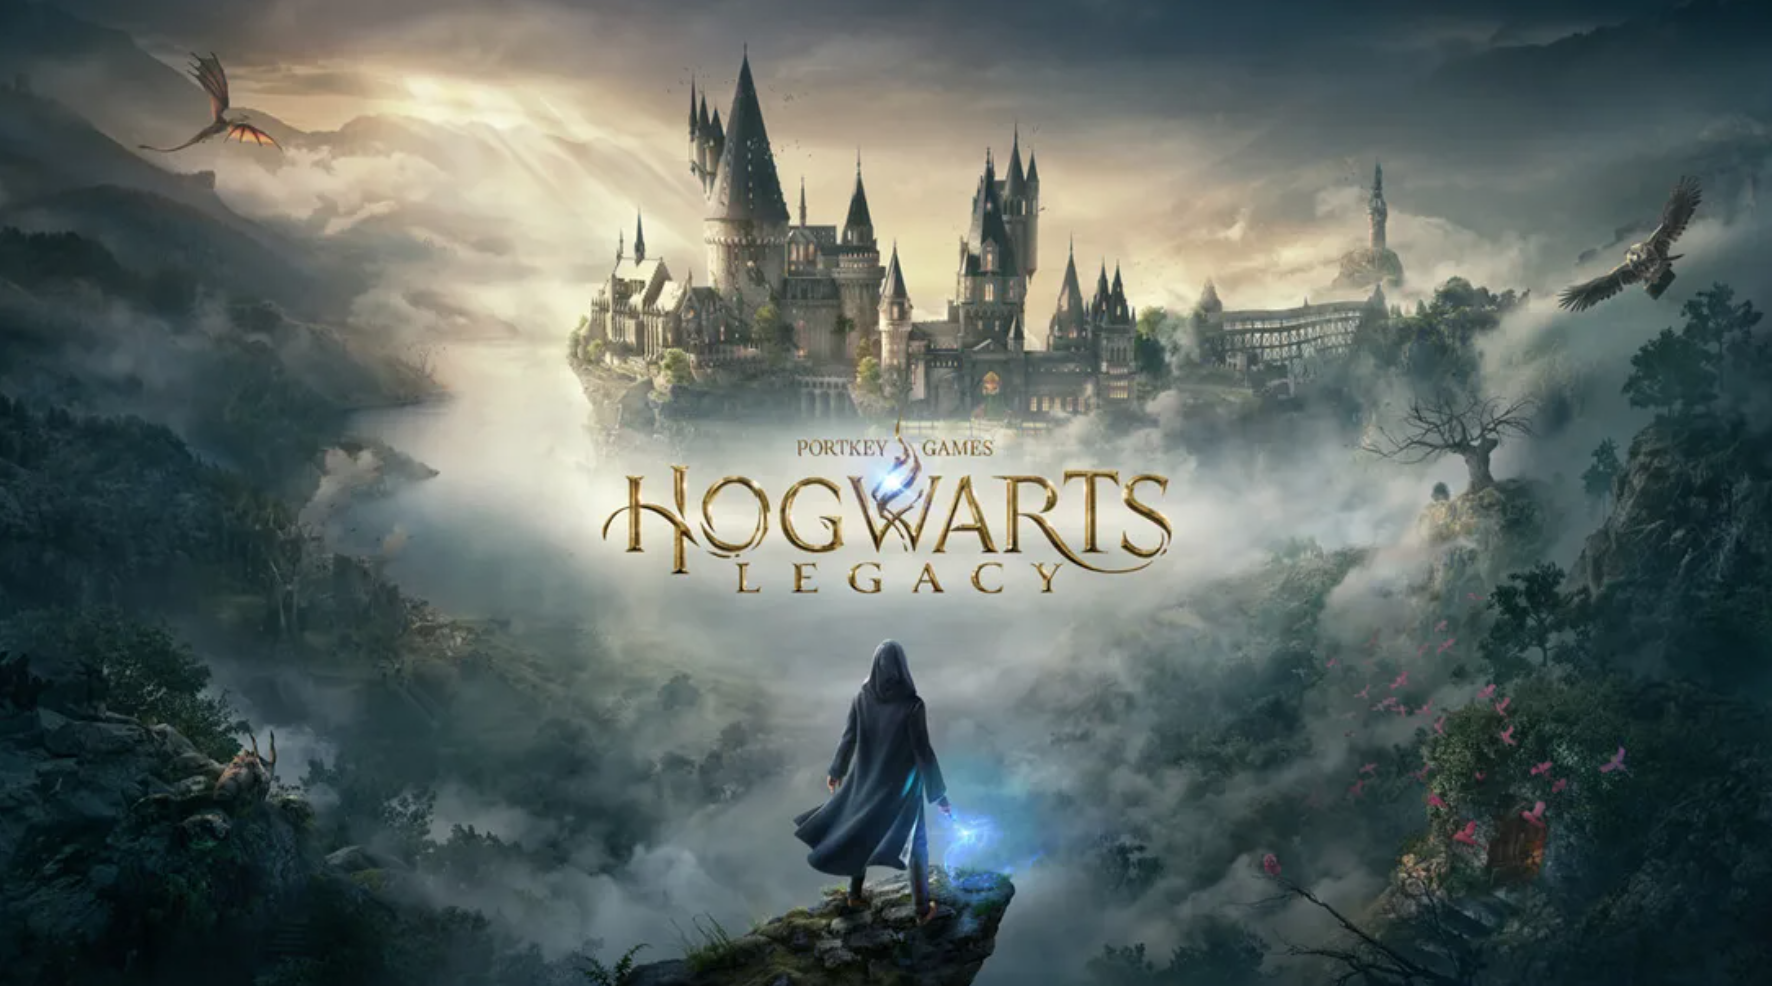 'Hogwarts Legacy' looks awesome, but do I really want to put money in